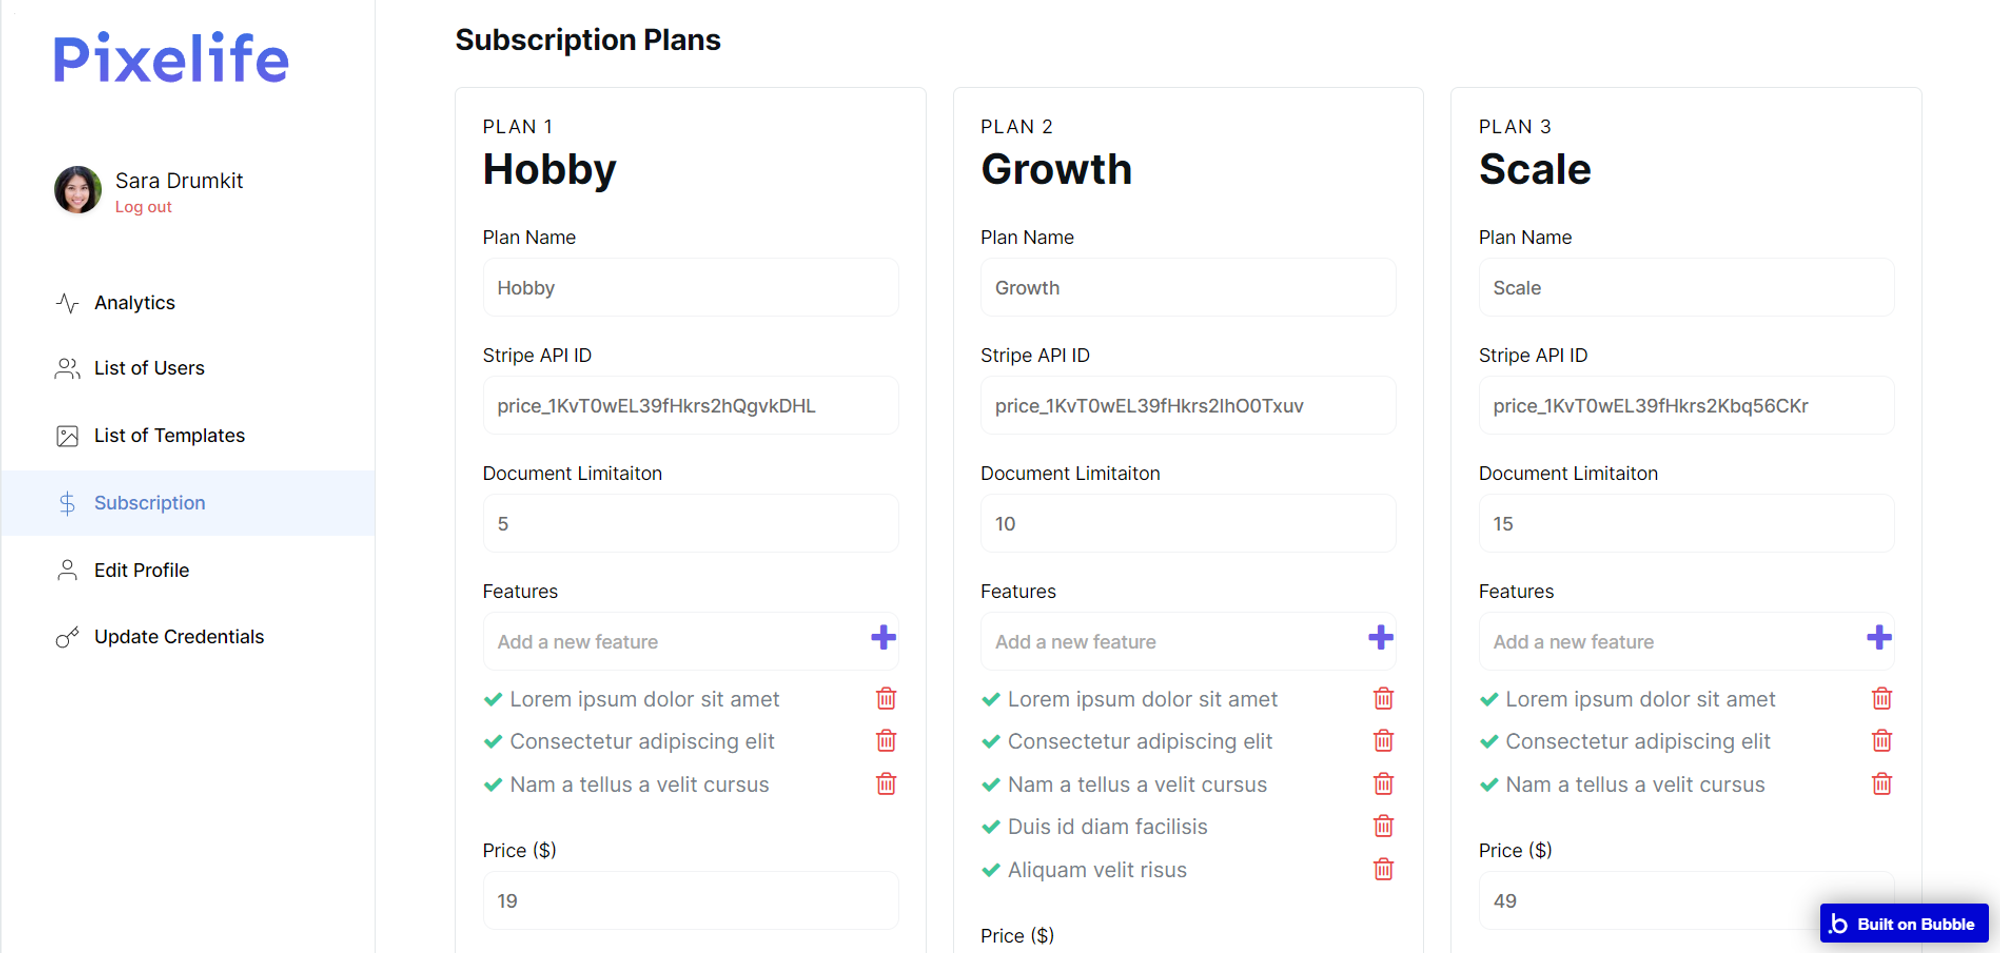 Admin panel > Subscription (to manage plans)